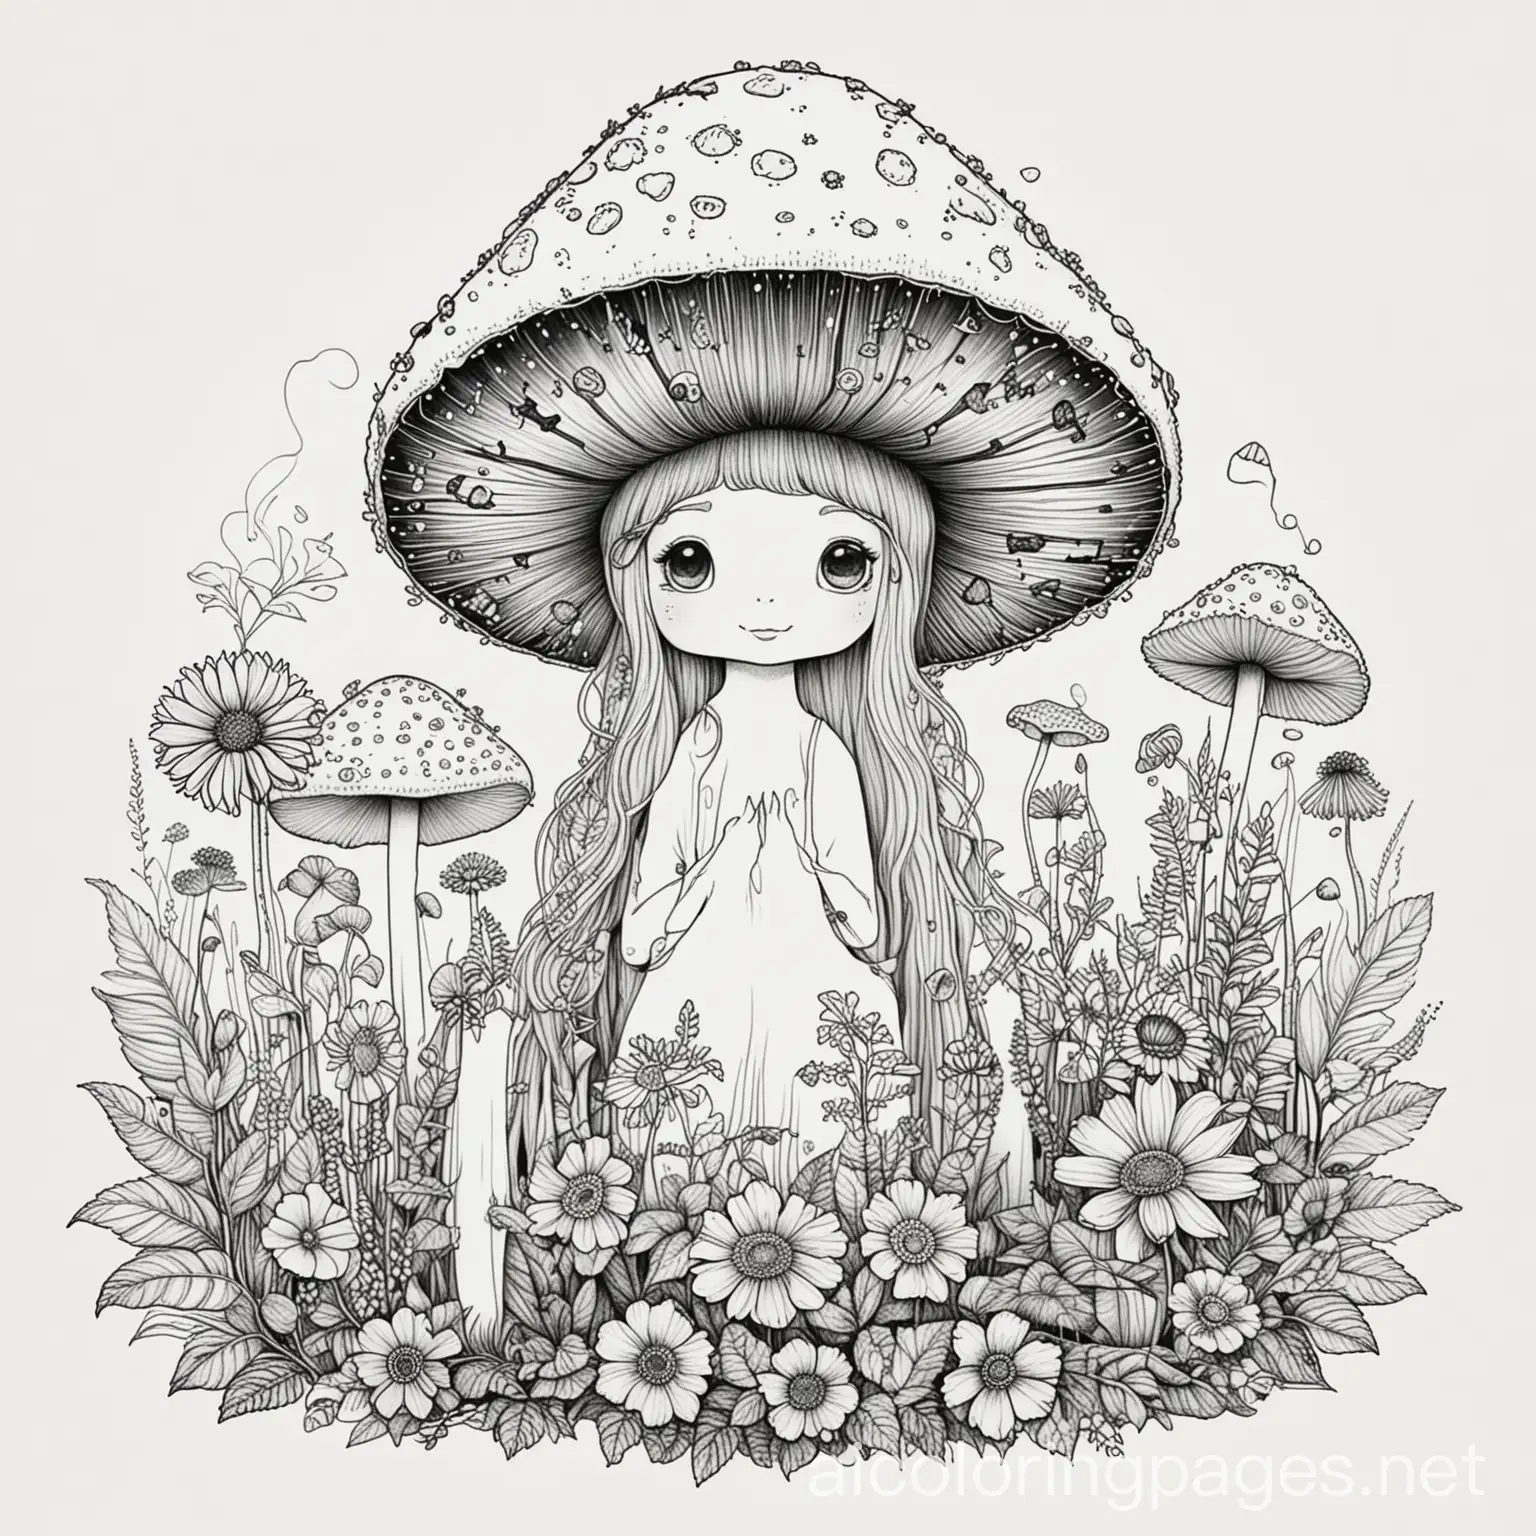 Hippies and flowers and mushroom 

, Coloring Page, black and white, line art, white background, Simplicity, Ample White Space. The background of the coloring page is plain white to make it easy for young children to color within the lines. The outlines of all the subjects are easy to distinguish, making it simple for kids to color without too much difficulty